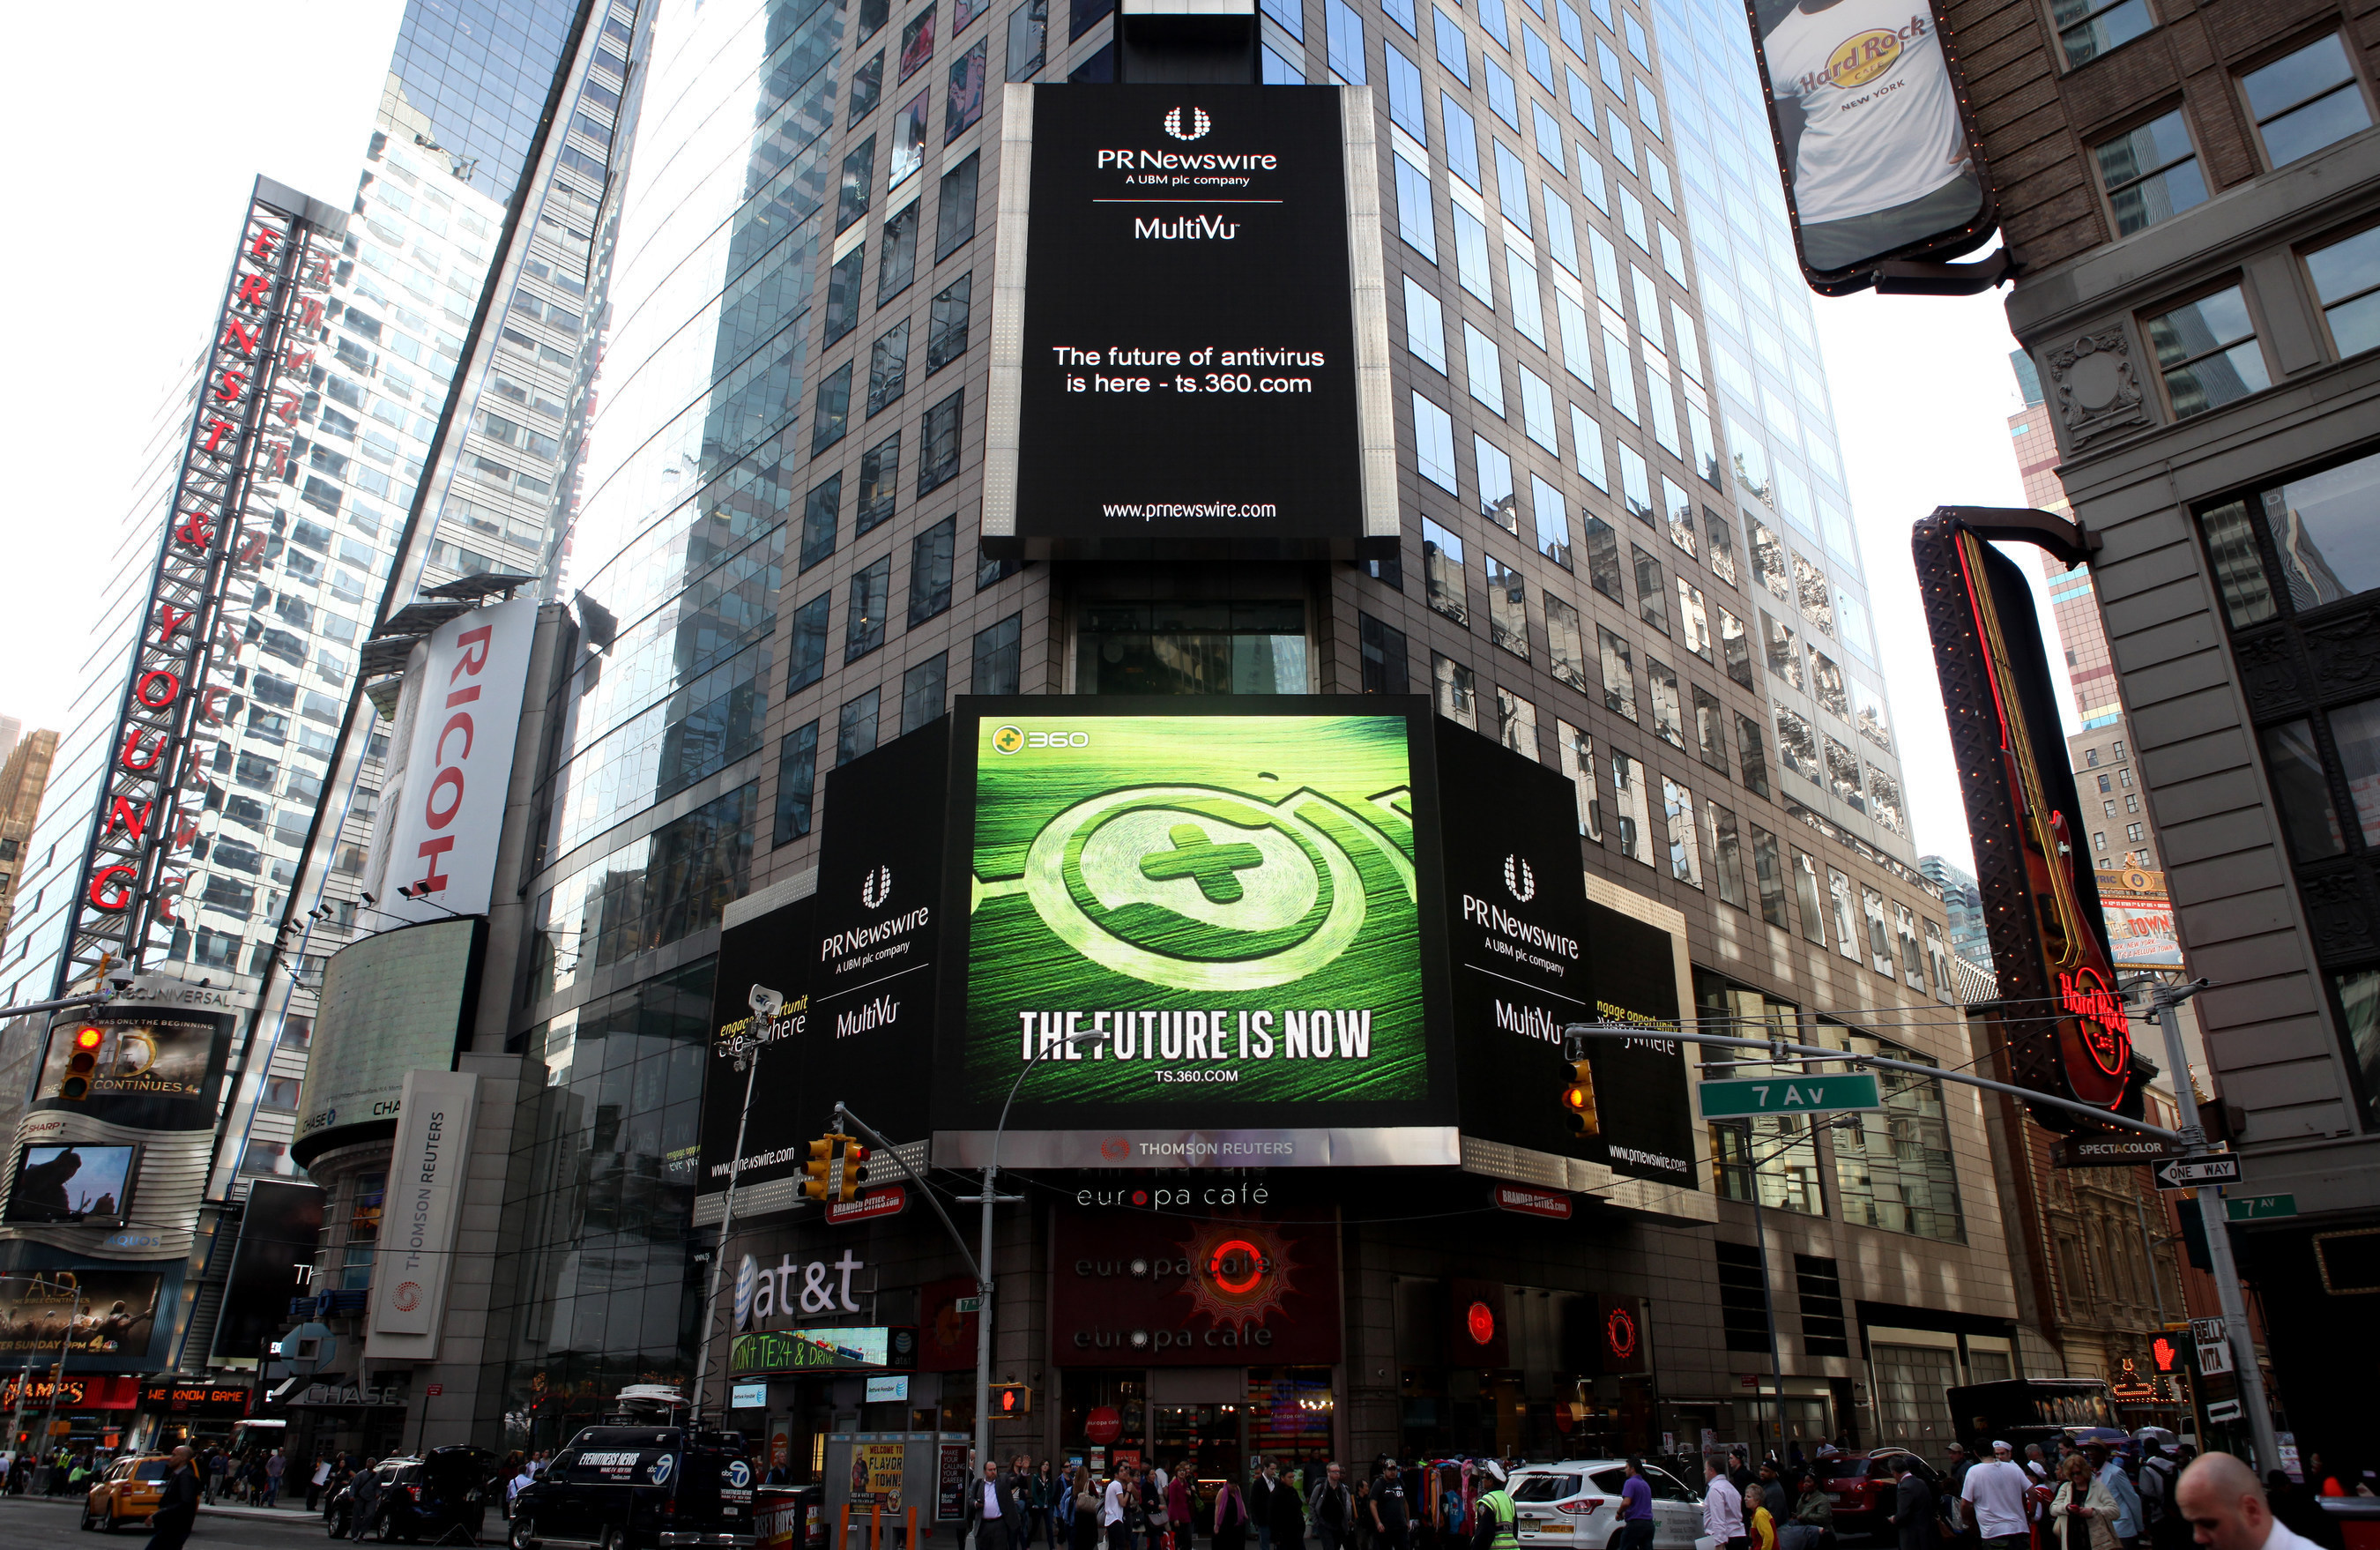 The Future is Now -- Qihoo 360 Advertisement on Times Square